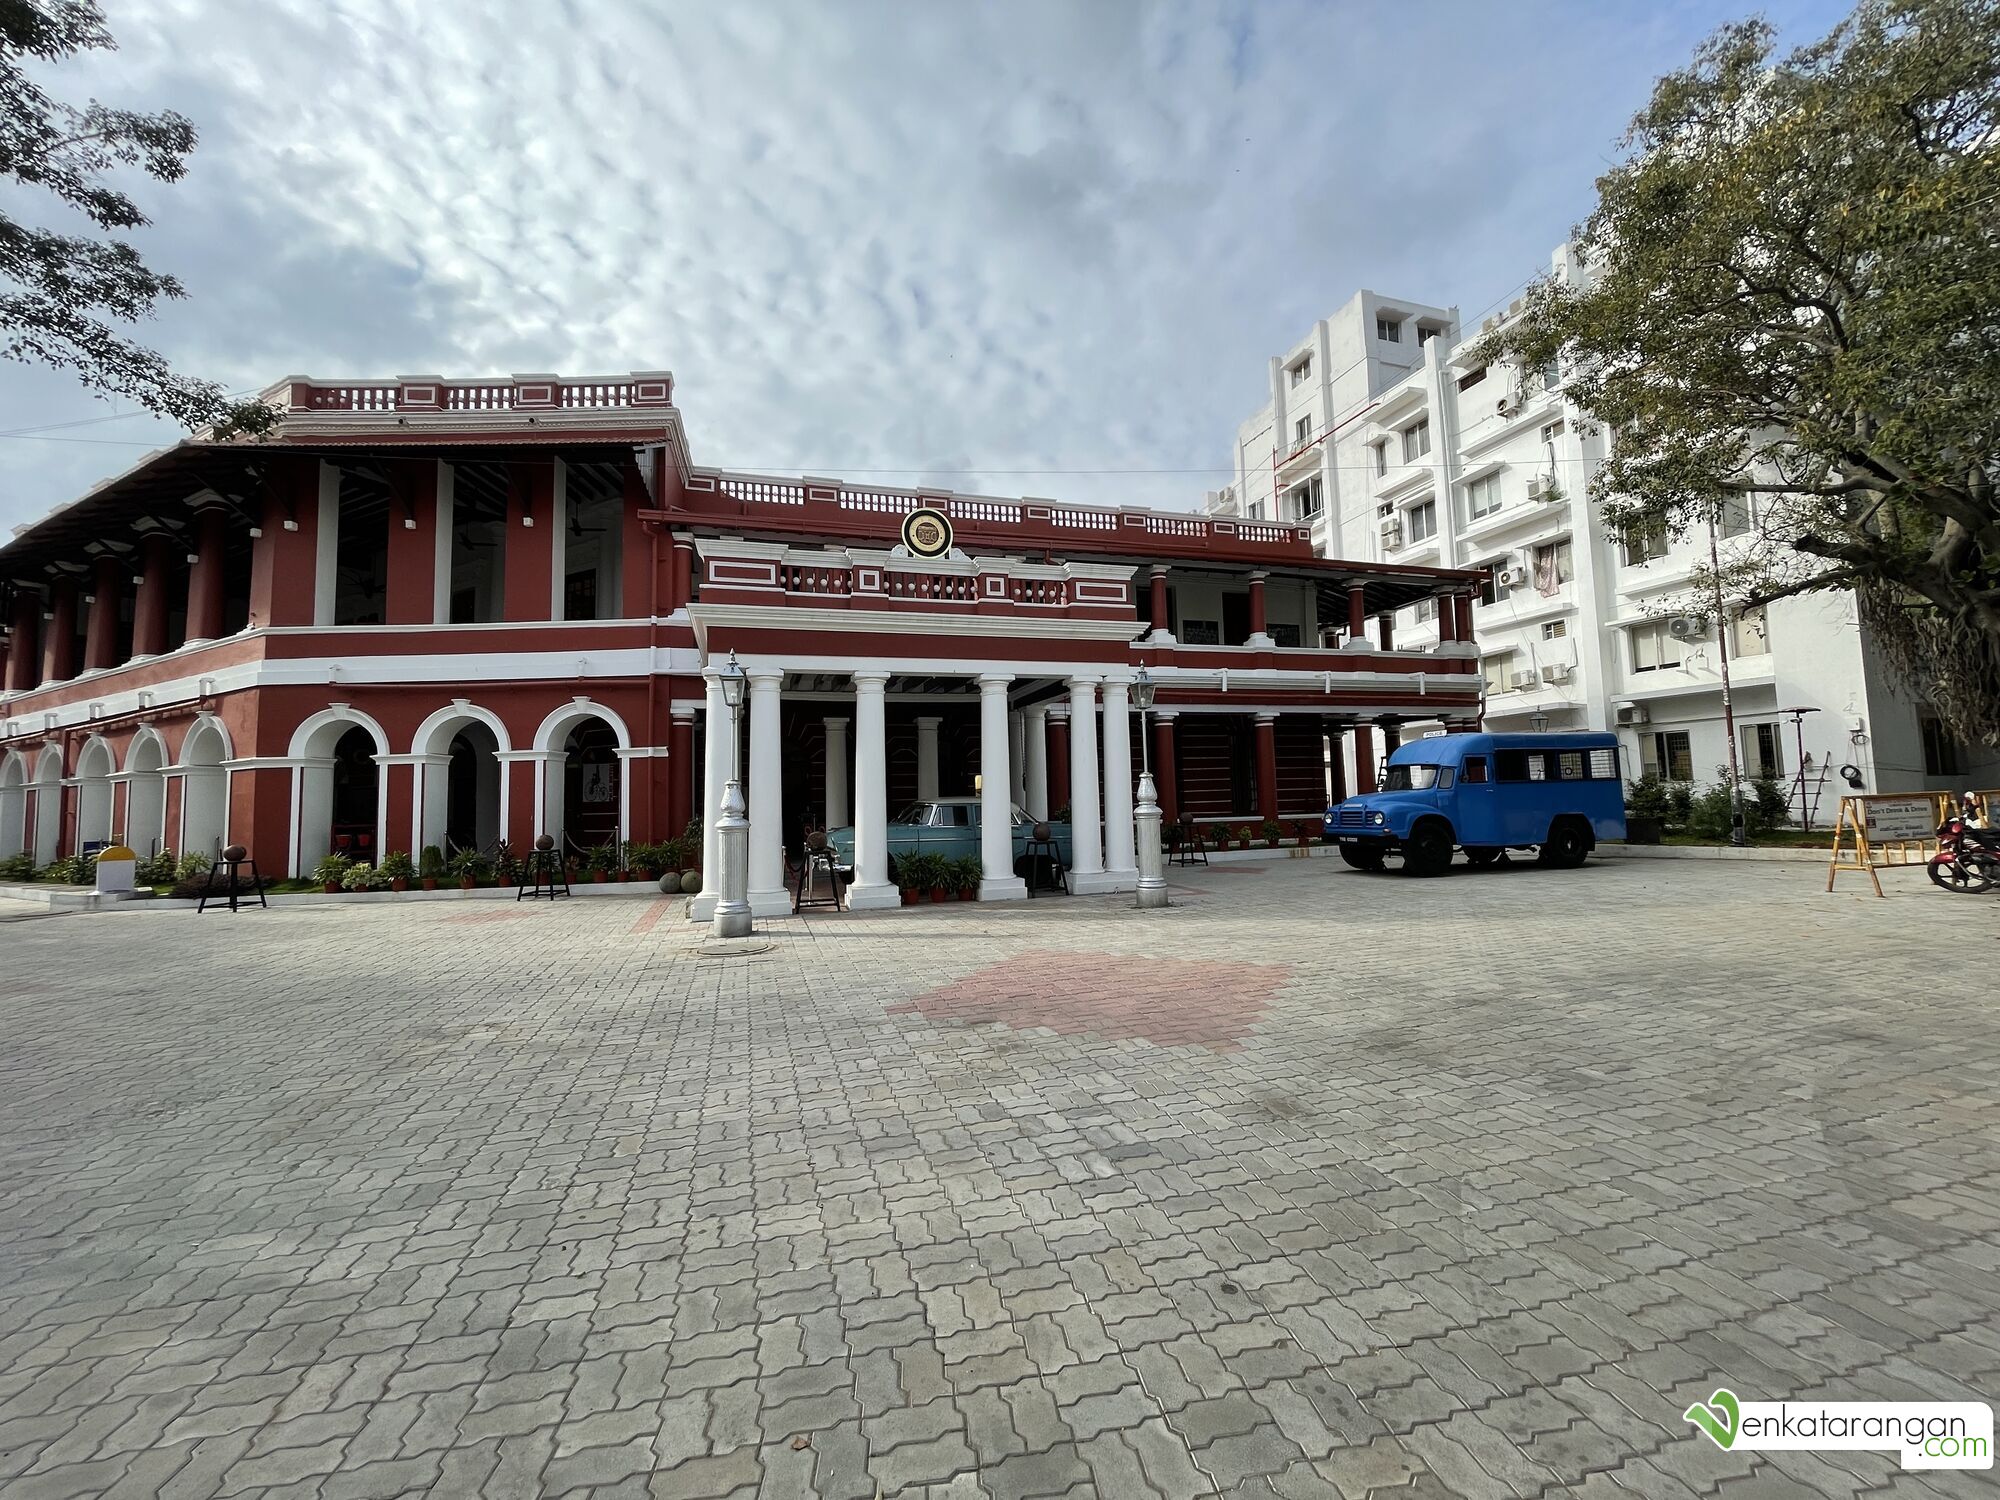 The imposing red building of erstwhile Madras Commissioner's Office